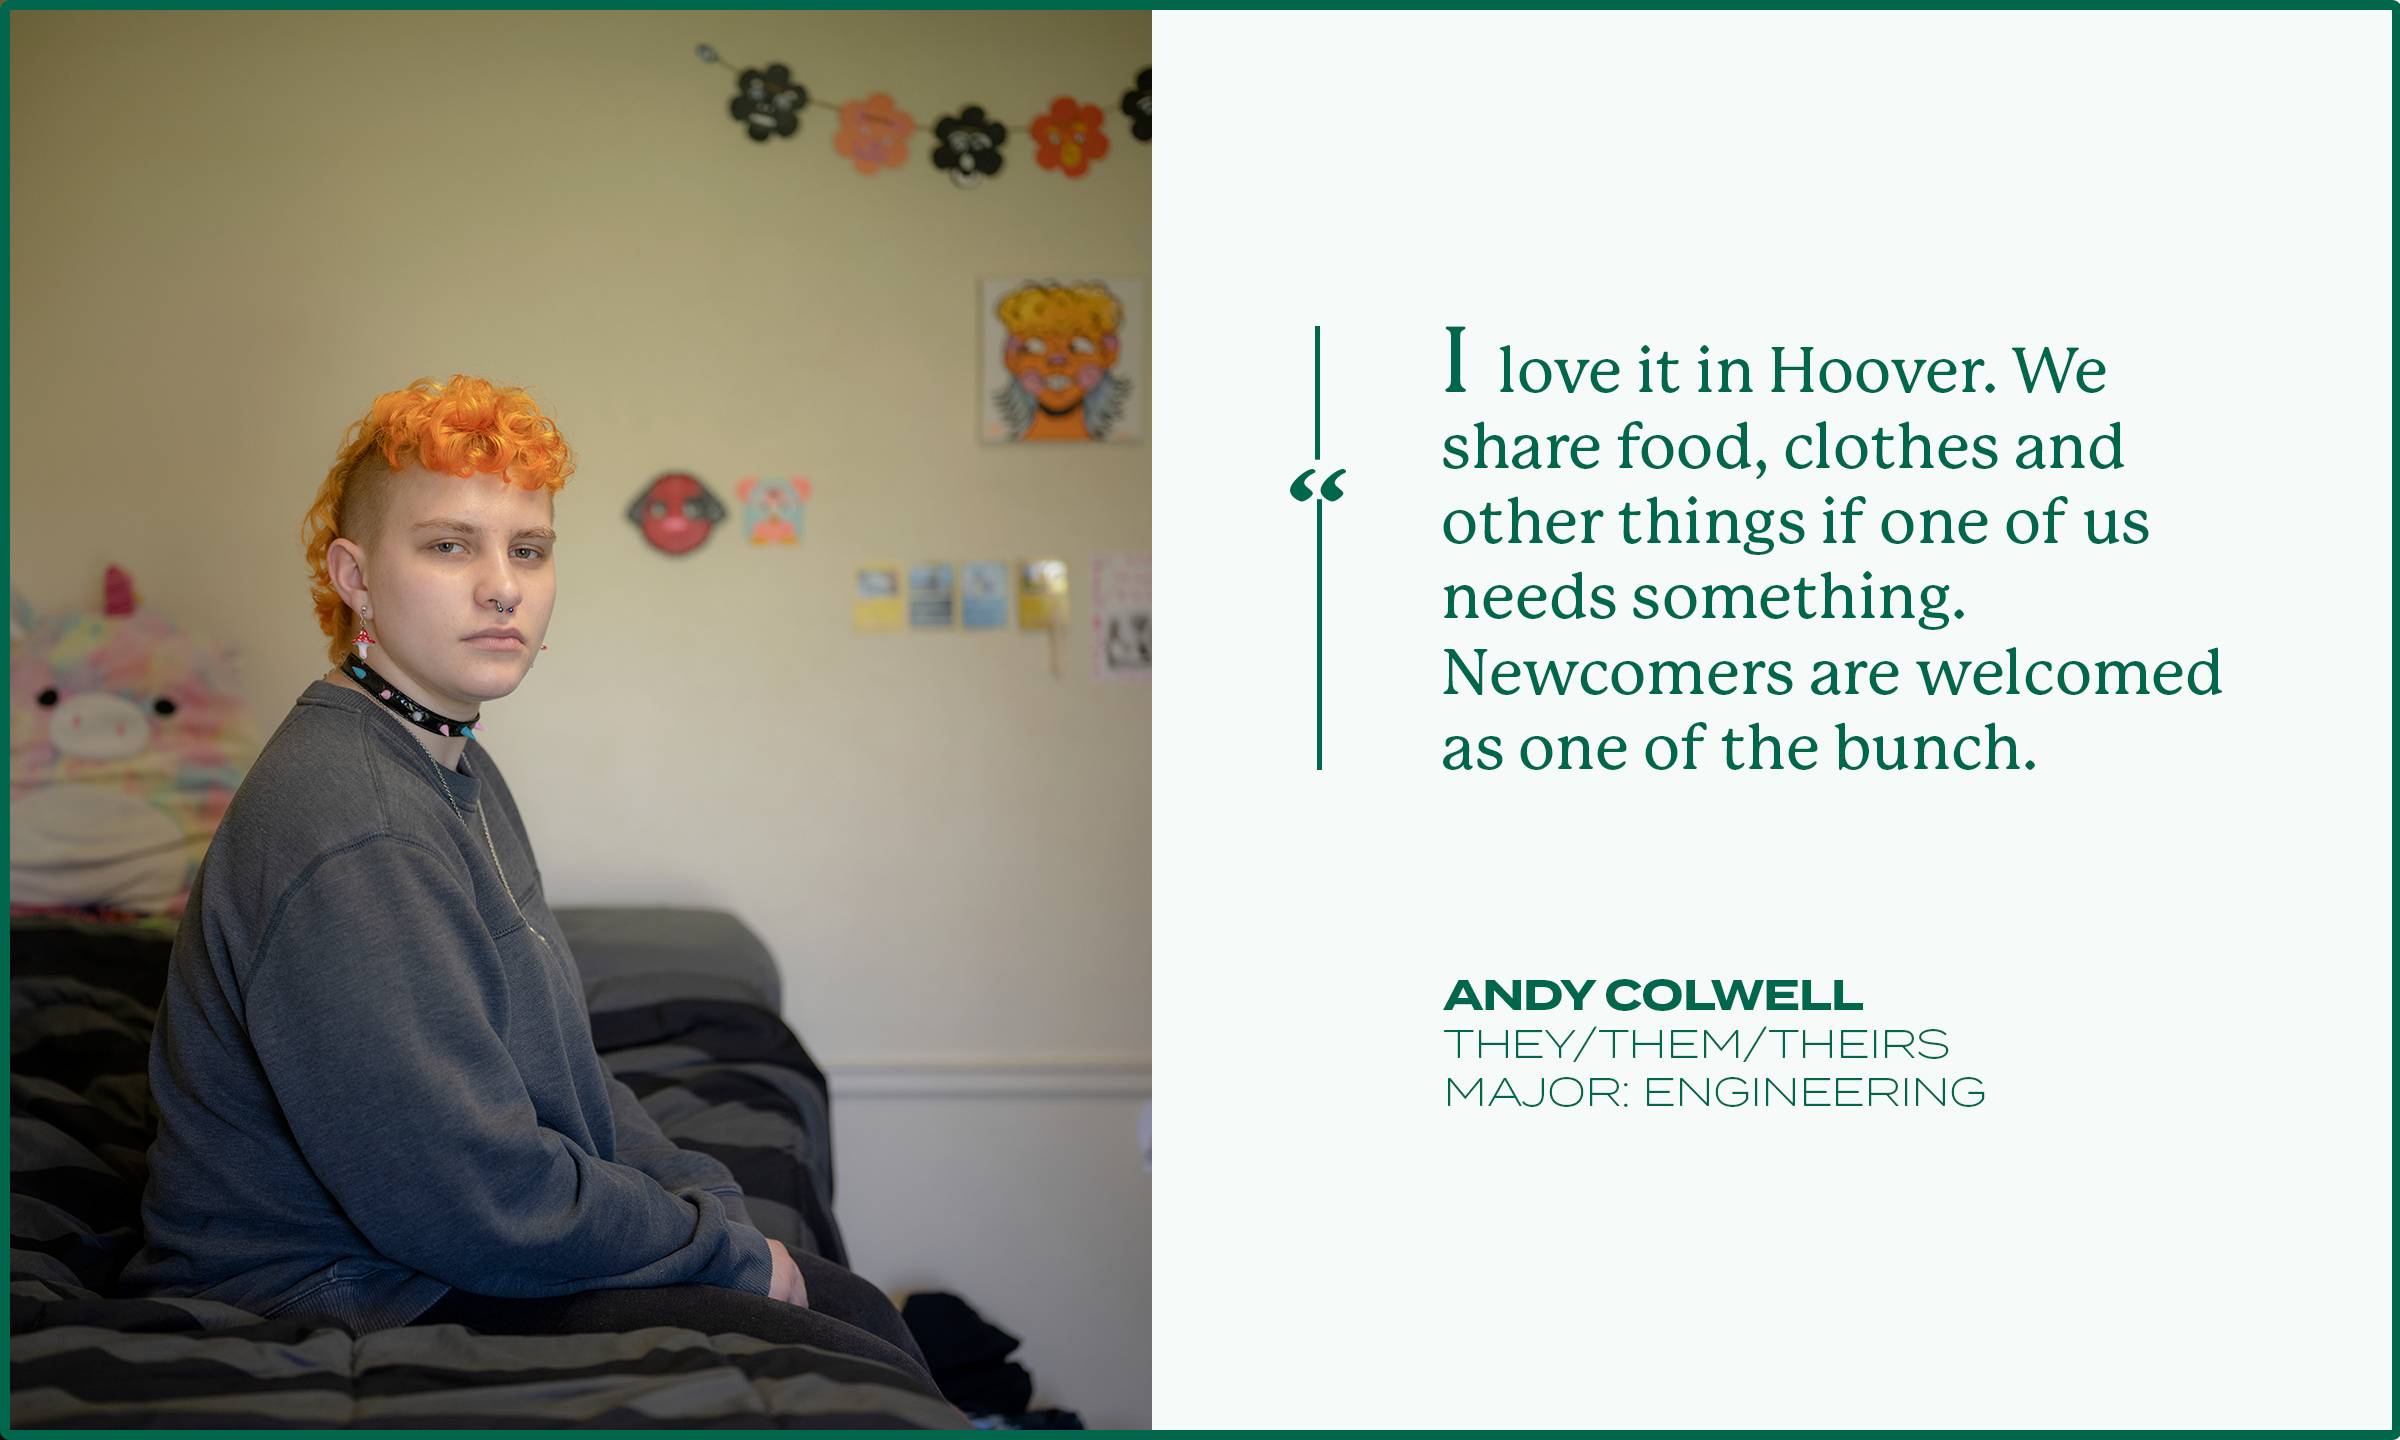 Andy Colwell (they/them/theirs) is an engineering major